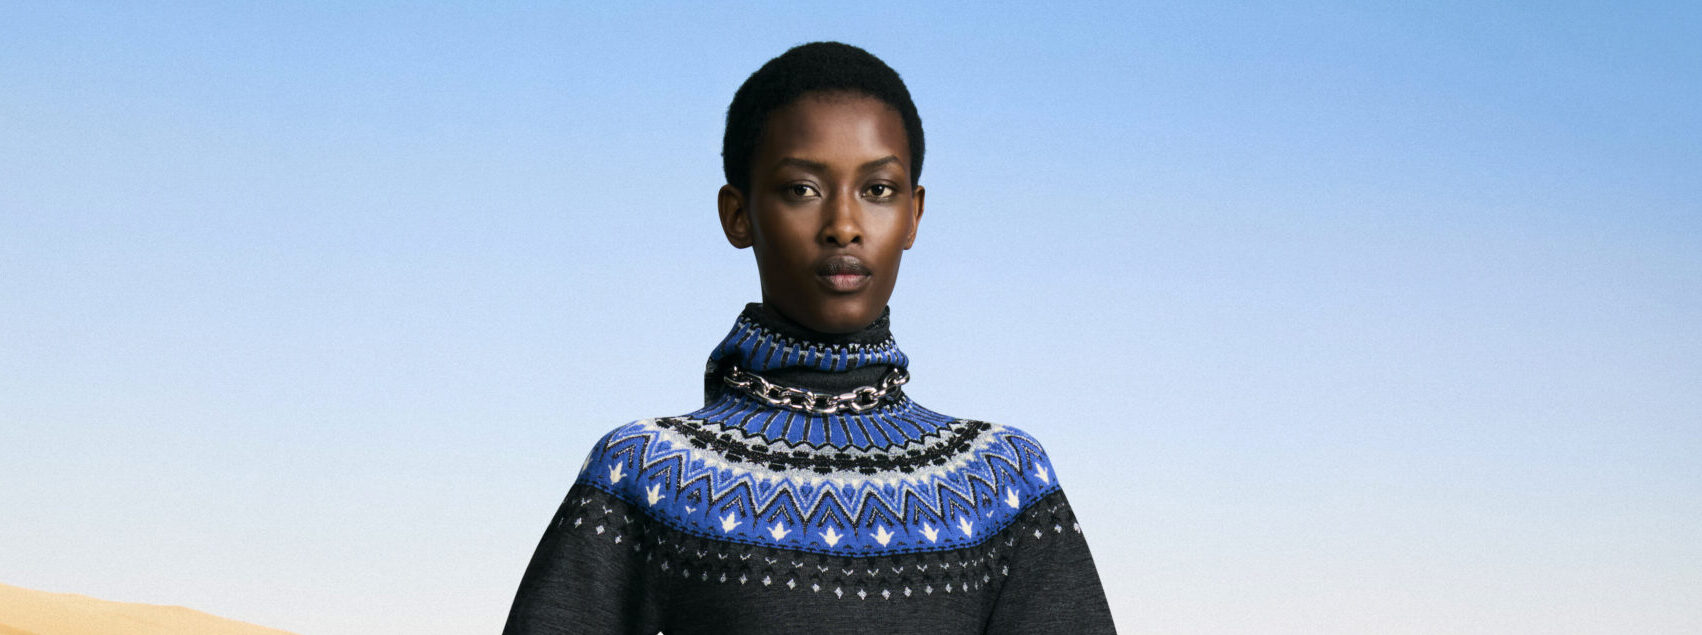 A model poses confidently wearing a Paco Rabanne Pre-fall 2024 ensemble featuring a high-neck sweater adorned with intricate geometric patterns in shades of blue, black, and white, and accented with a stylish metal chain necklace.